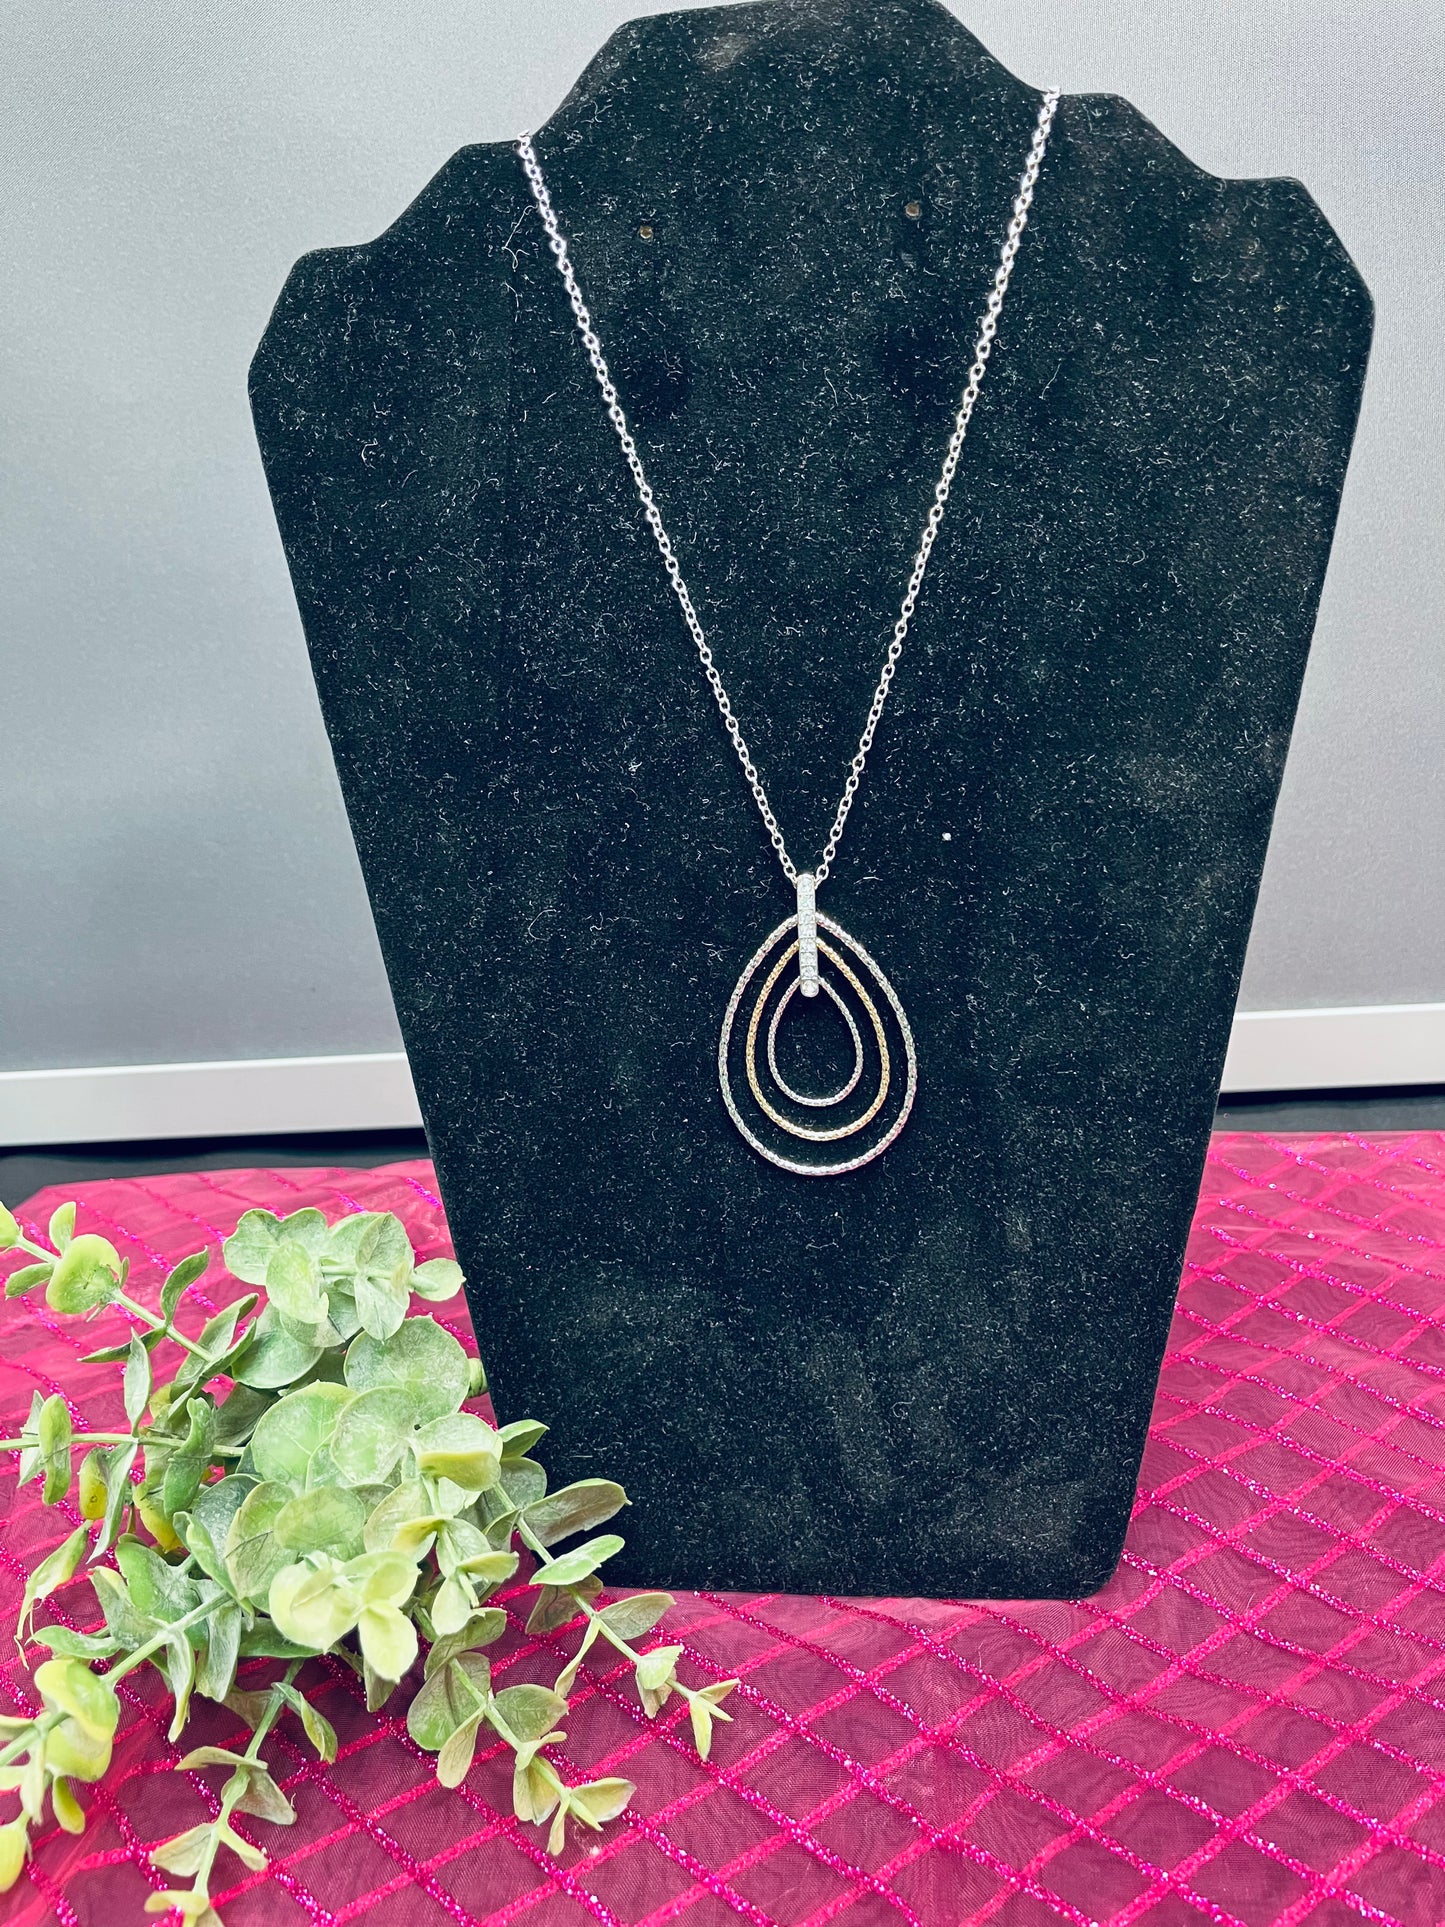 Silver/gold ringed teardrop necklace